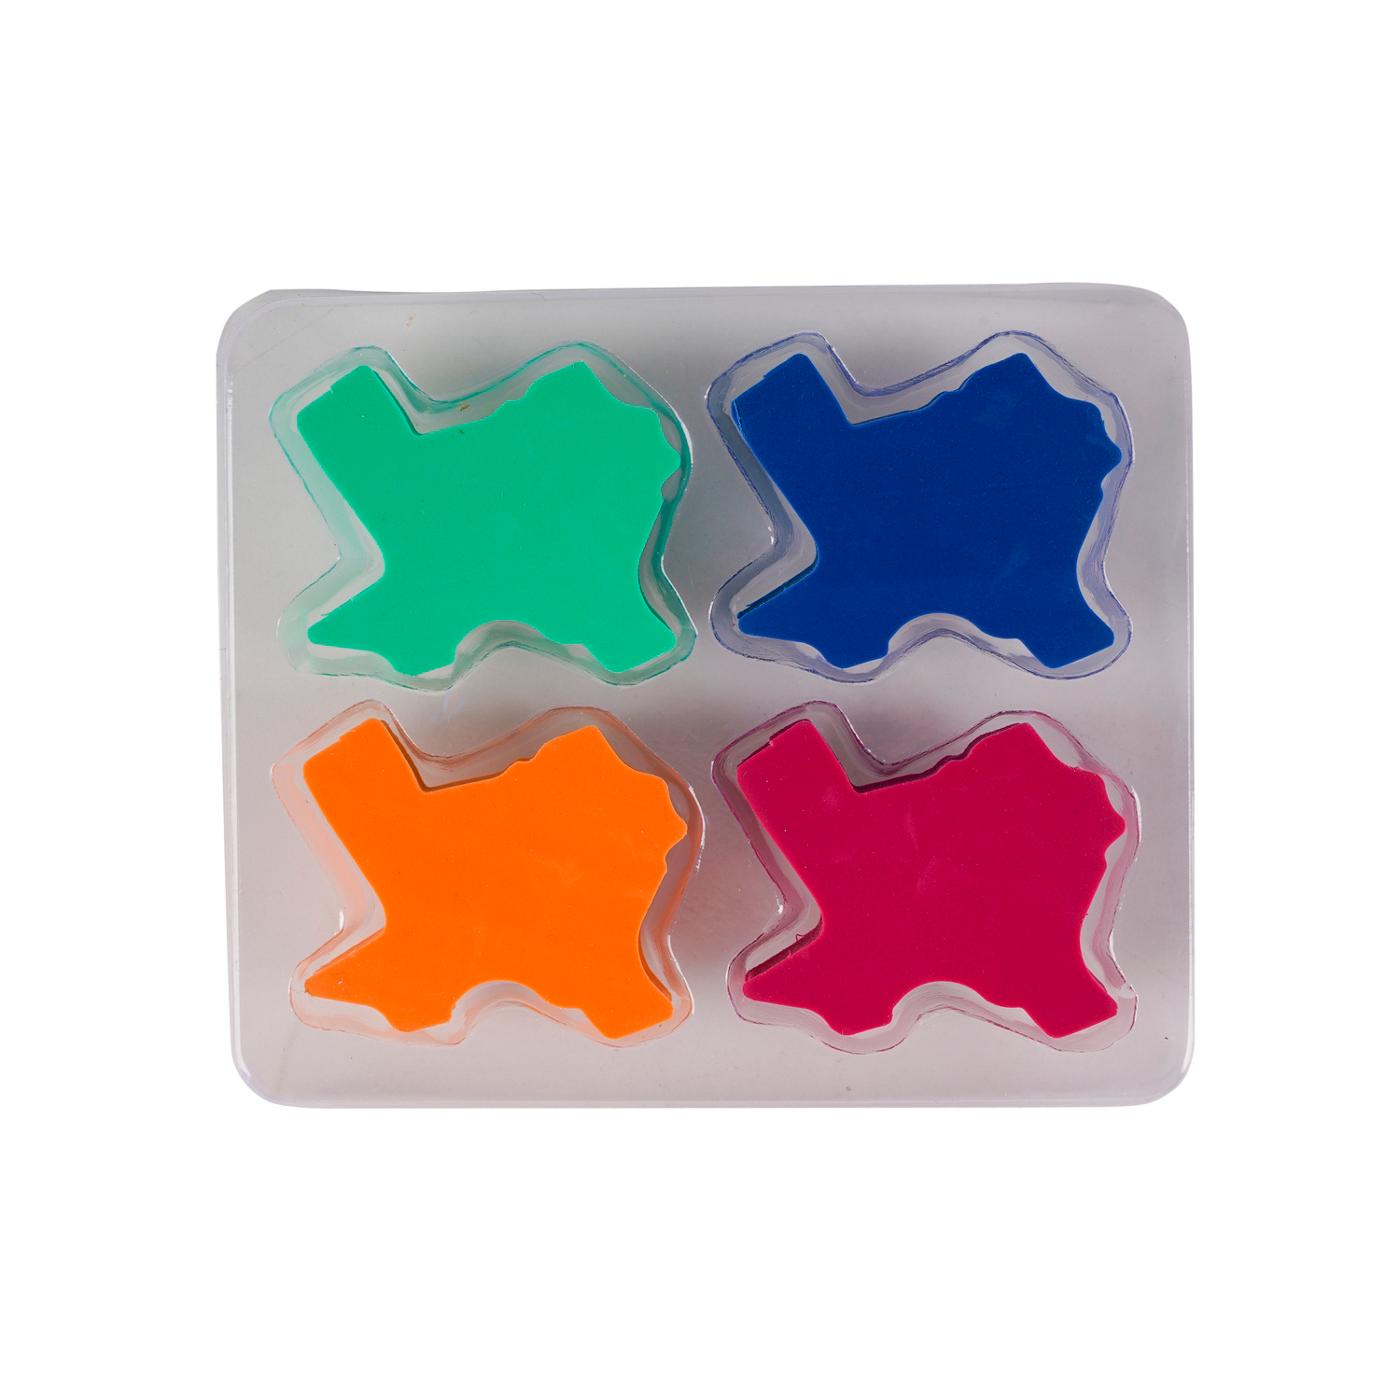 Destination Holiday Texas Shaped Erasers -  Assorted Colors; image 2 of 3